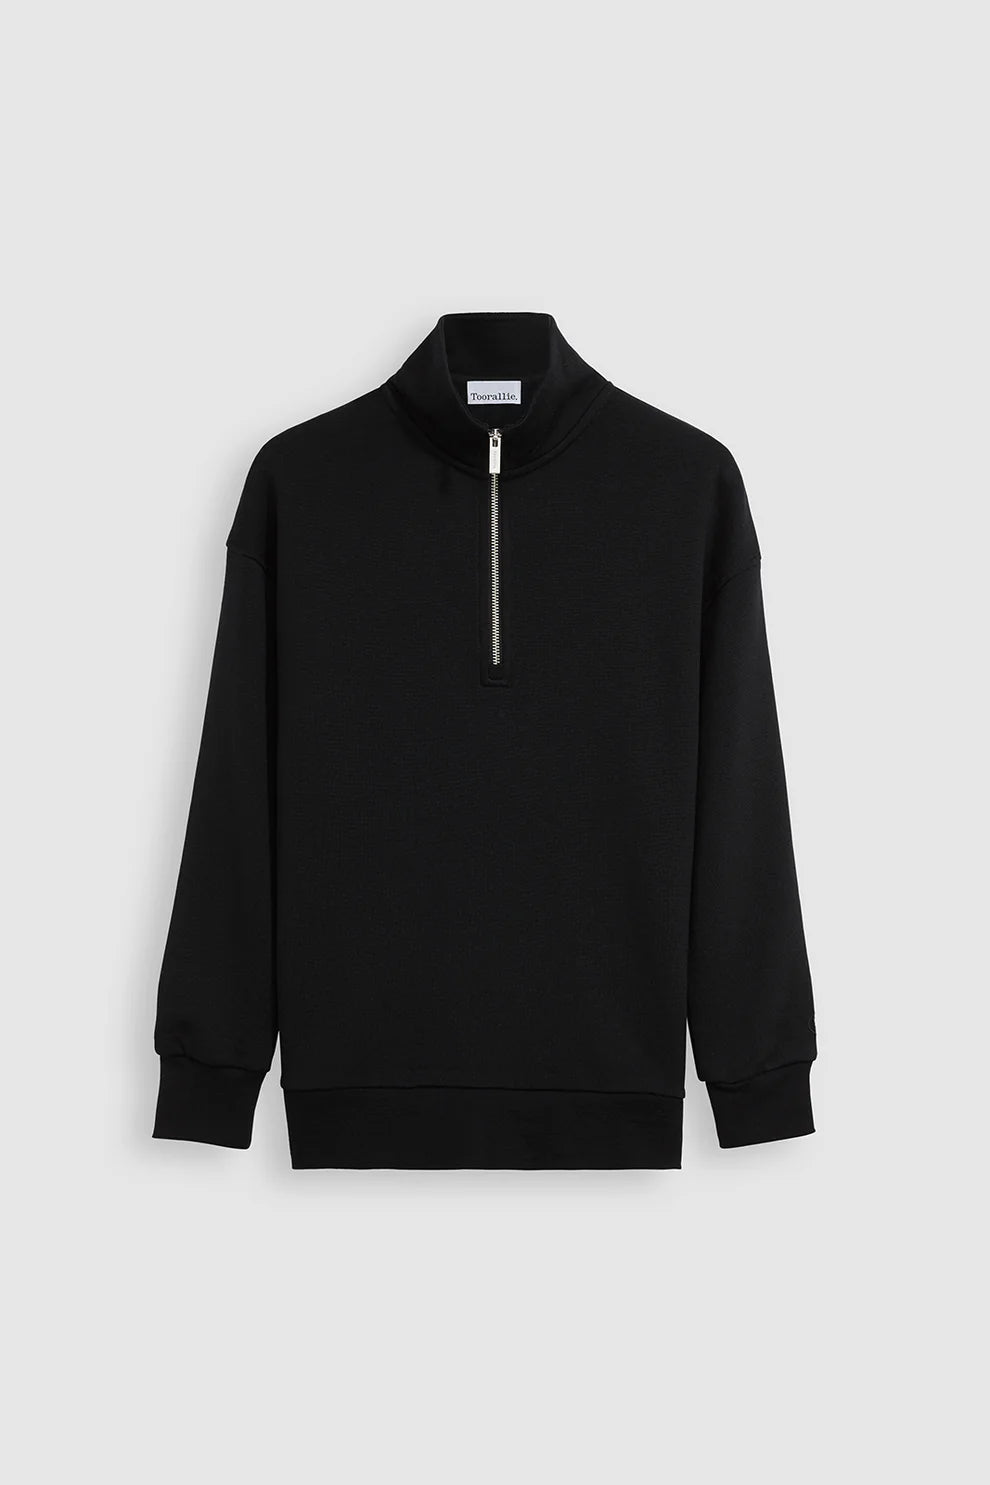 "Experience luxury like never before with our black Merino wool zip collar sweater. Unmatched softness, undeniable appeal."